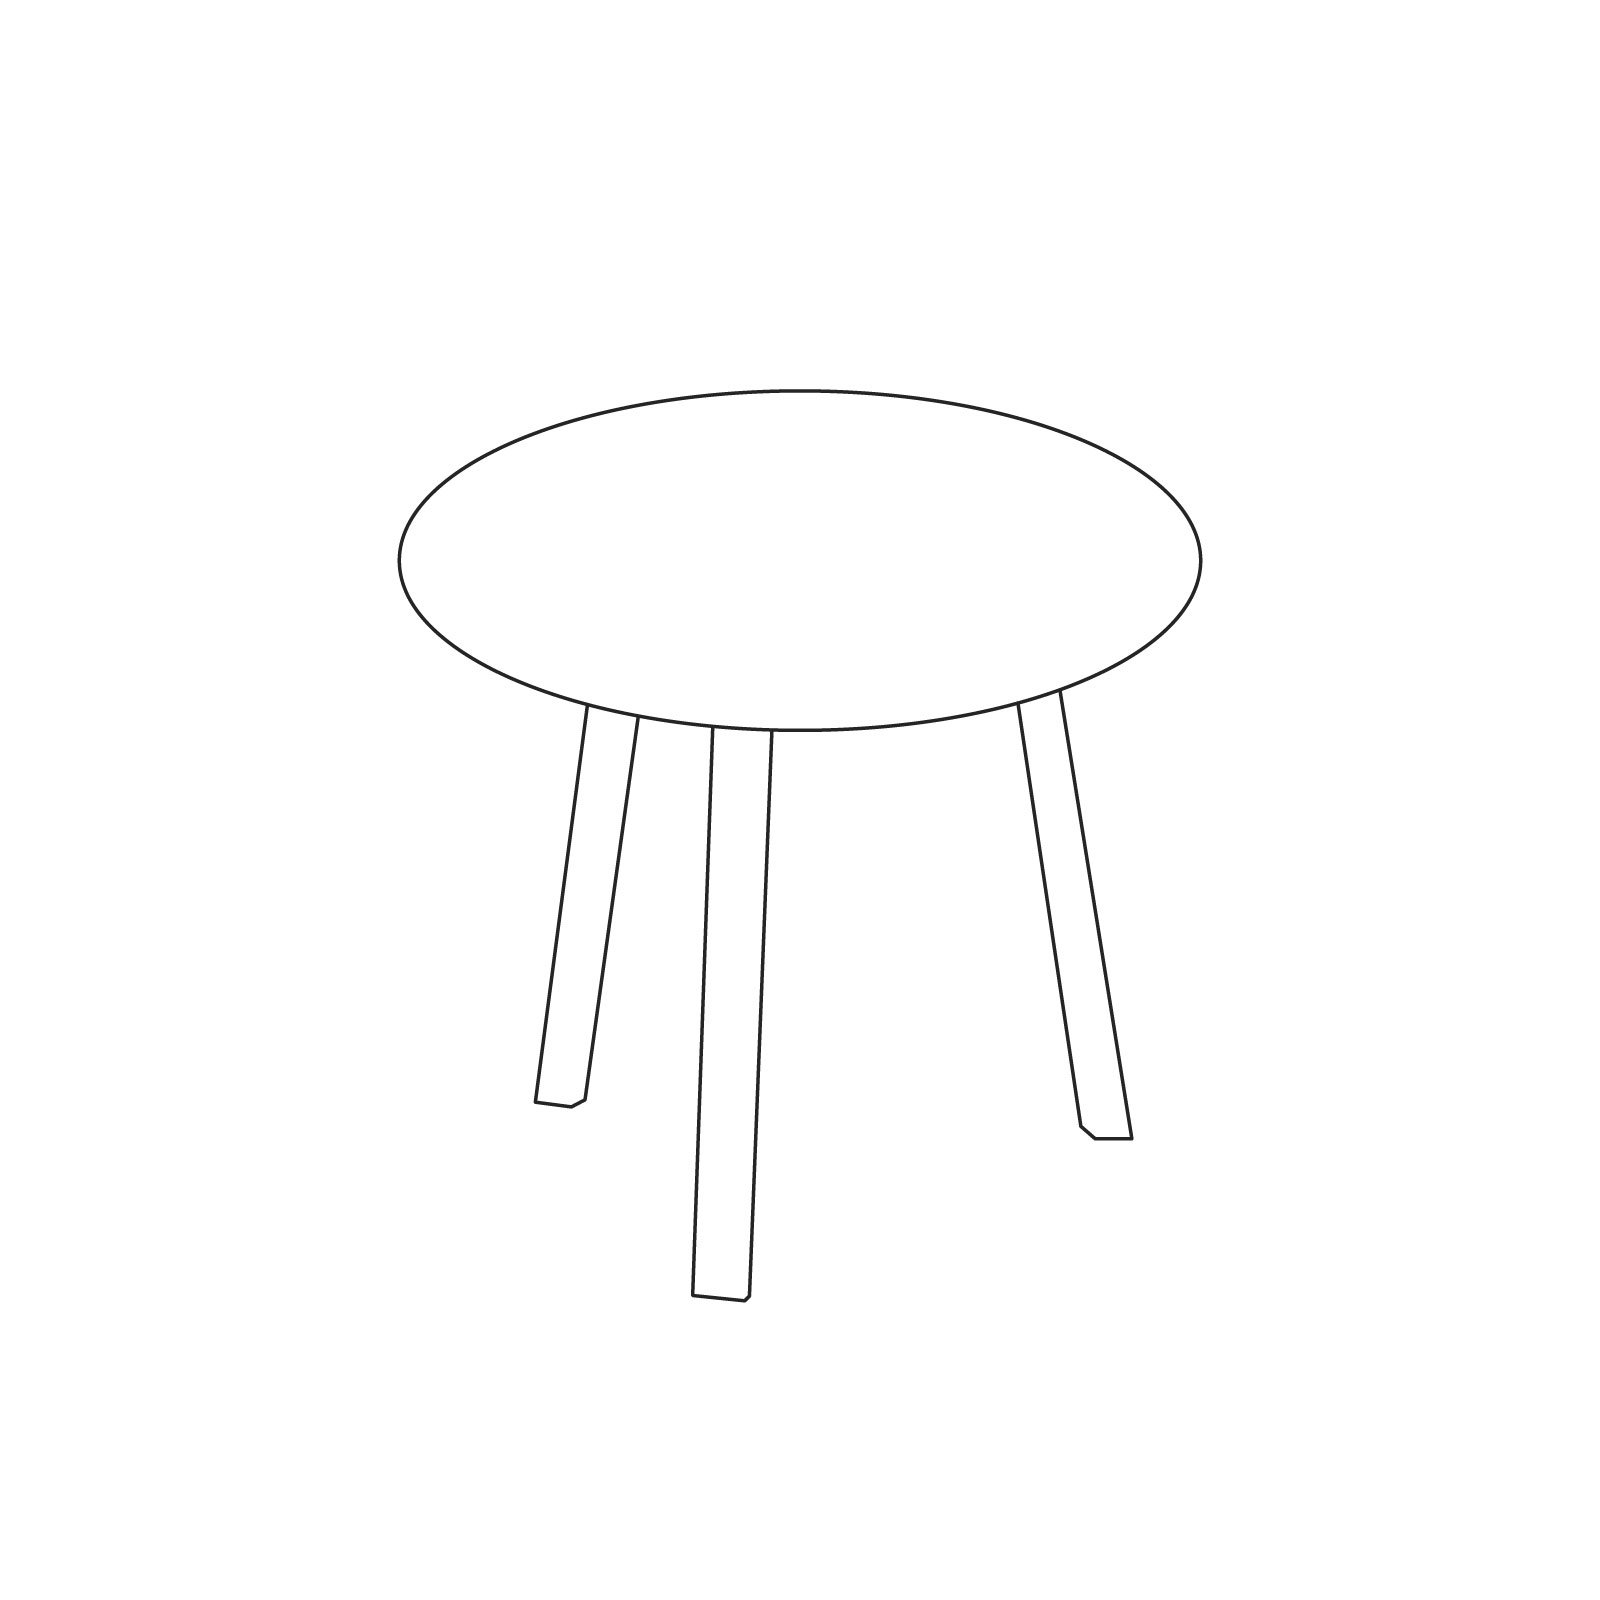 Table Drawing Image